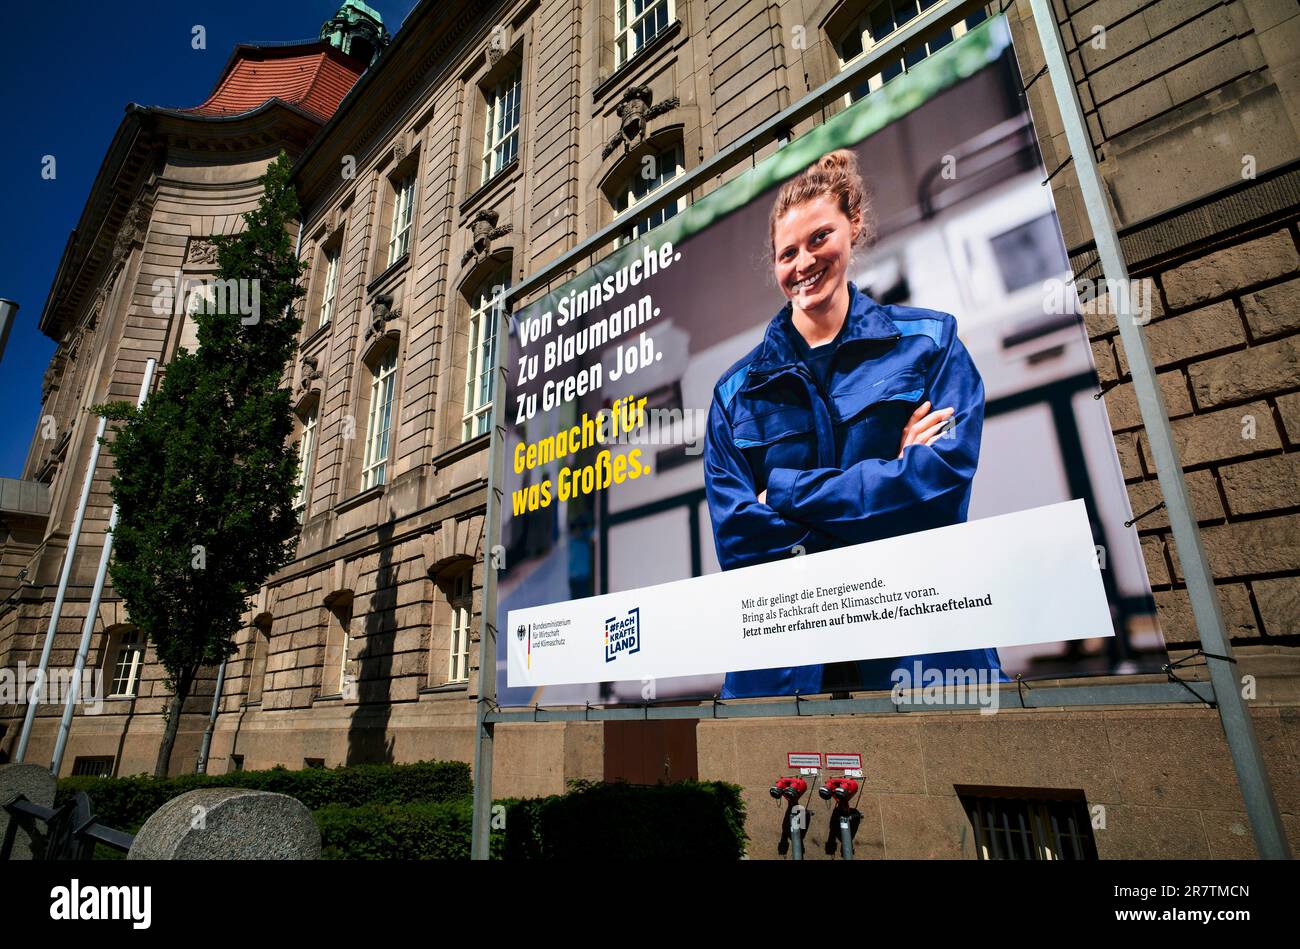 Poster, advertisement, advertising poster, advertisement on sign in front of Federal Ministry of Economics and Climate Protection, Ministry of Stock Photo